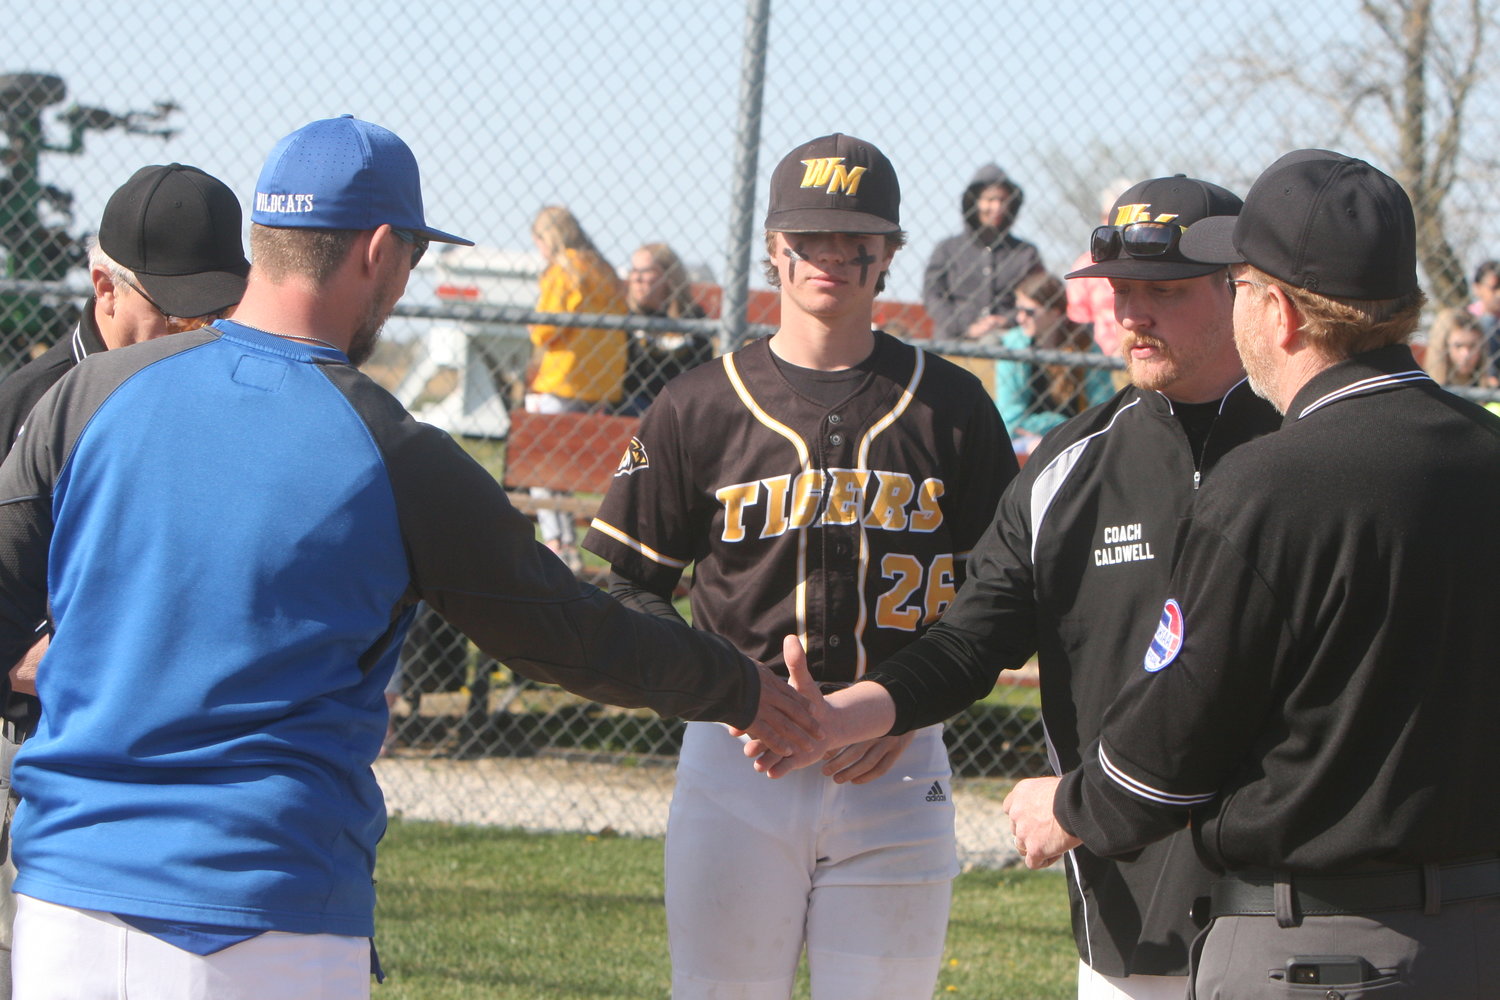 Montgomery County coach Vince Wolk shakes hands with Wellsville-Middletown coach Justin Caldwell before the Wildcats-Tigers game on April 26. W-M starts its district play on May 12, while MCHS begins its district action on May 16.